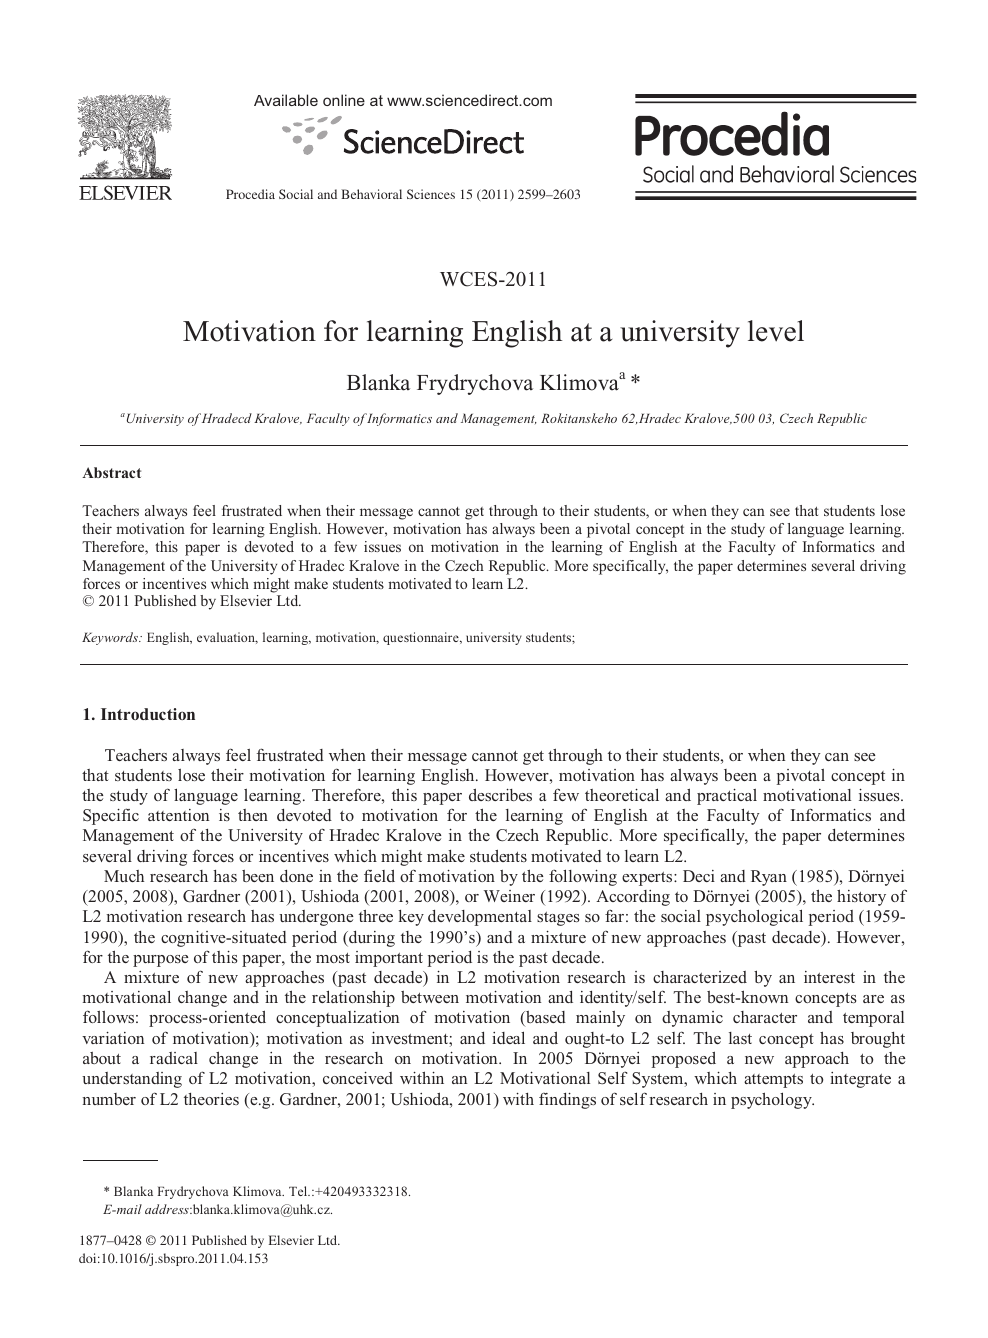 Motivation For Learning English At A University Level Topic Of Research Paper In Languages And Literature Download Scholarly Article Pdf And Read For Free On Cyberleninka Open Science Hub